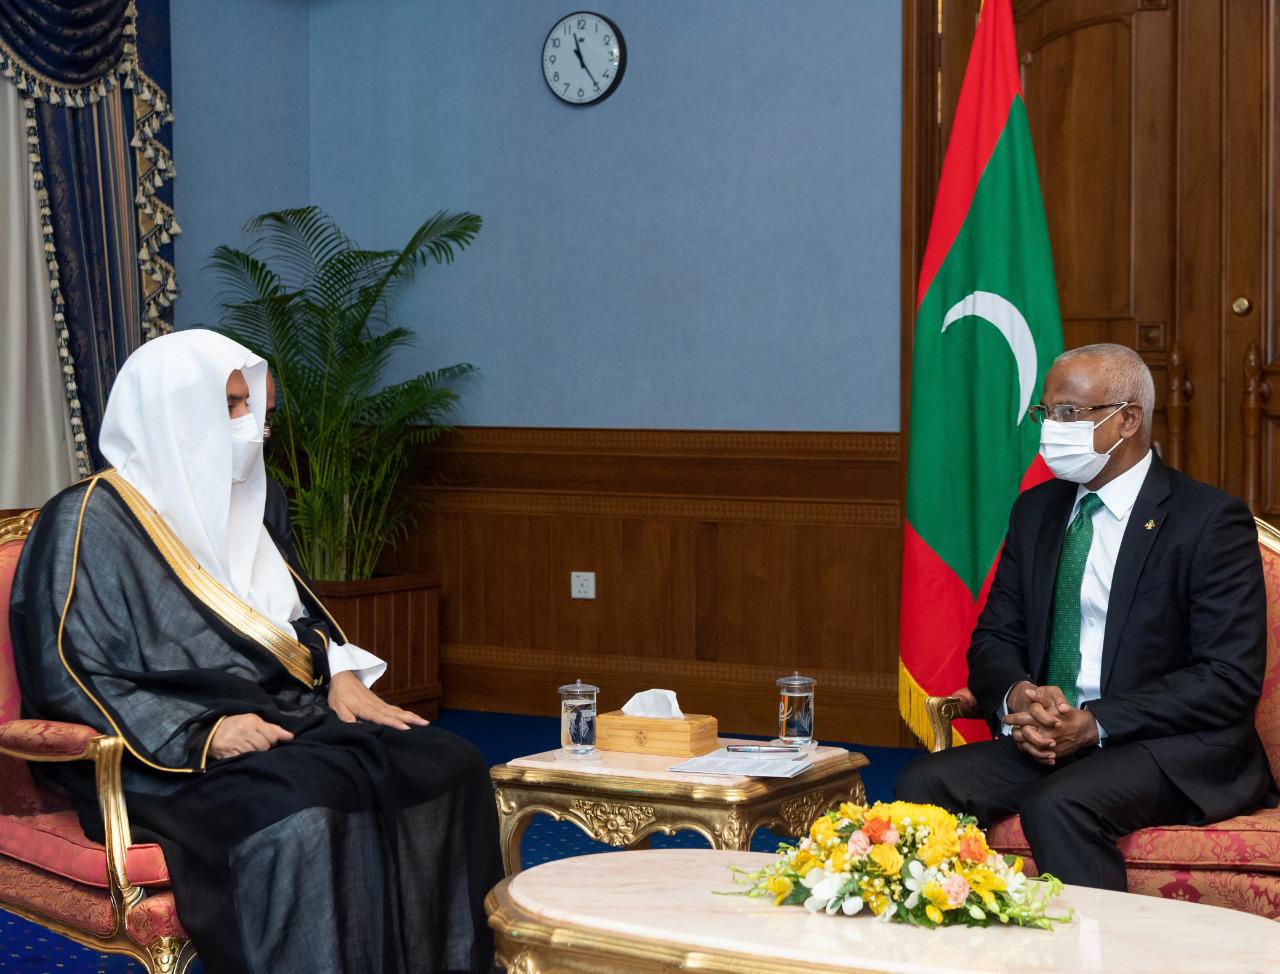 H.E. led the Muslim World League delegation on an official visit to the Maldives at the invitation of the Maldivian President